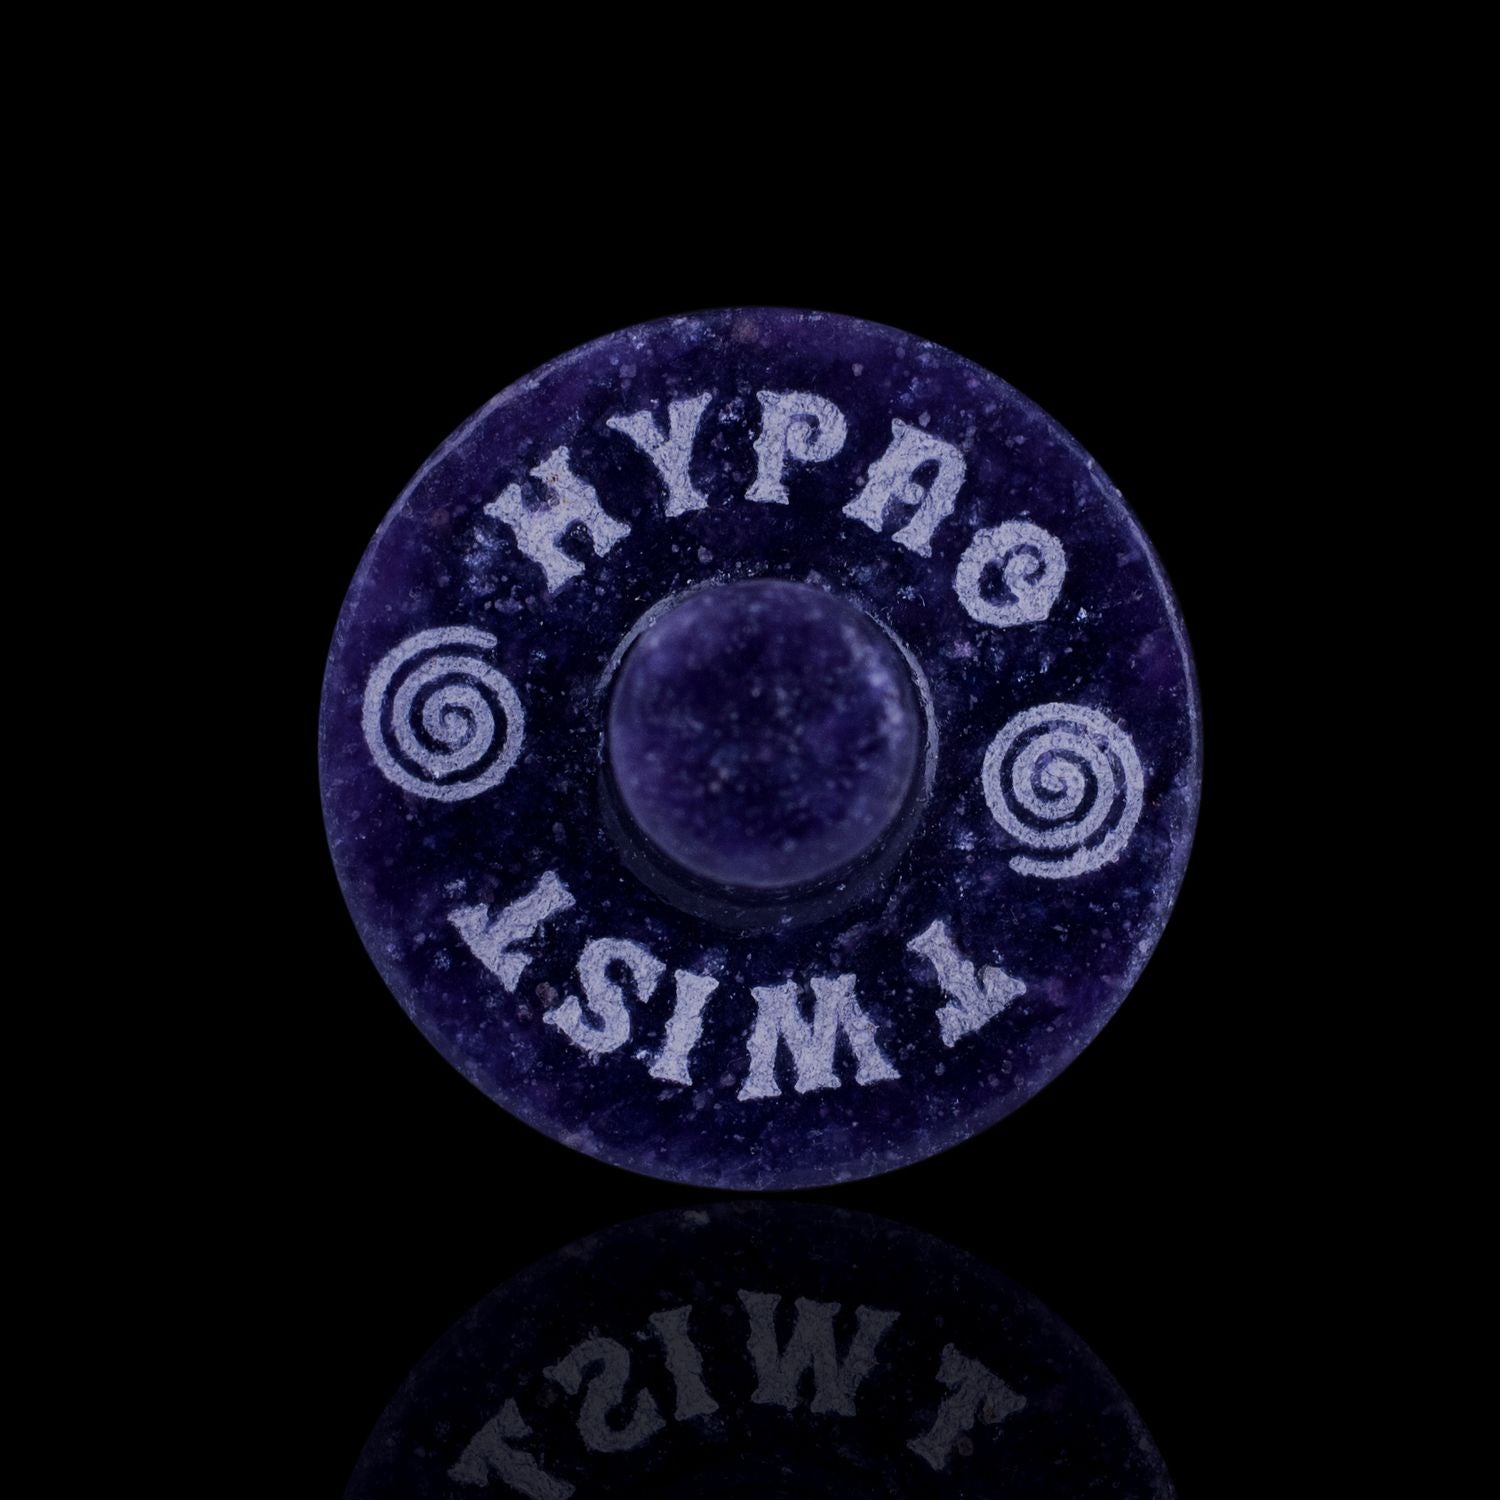 Front View Of The Naturally Wicked Exclusive Hypnotwister. A Lepidolite Crystal Spinning Top Engraved With Hypno Twist